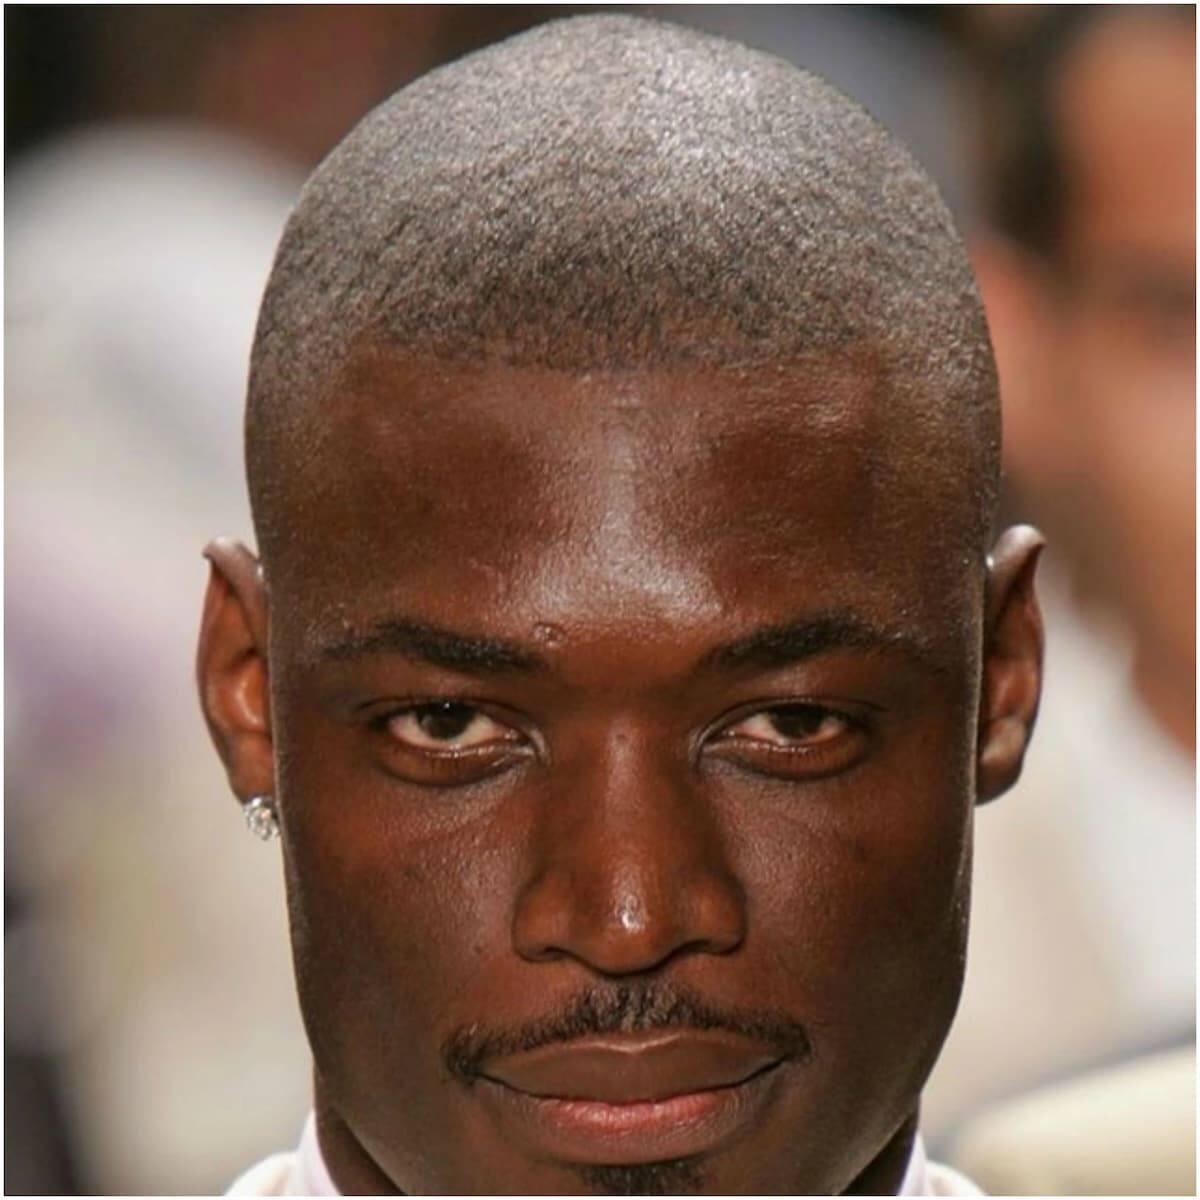 25 Modern Bald Fades to Show Your Barber